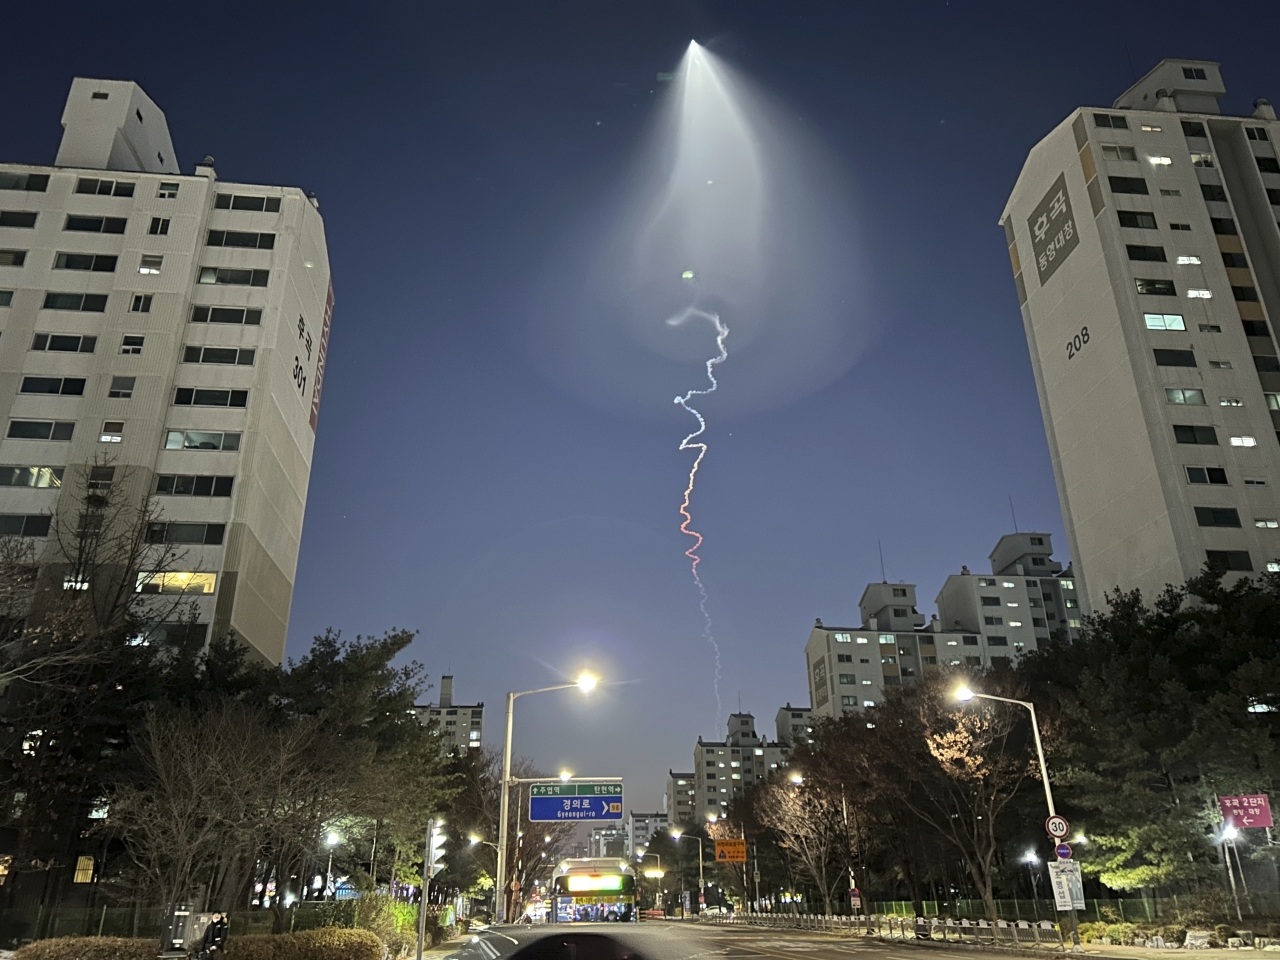 The light trail is seen in Goyang, South Korea, Friday, Dec. 30, 2022. South Korea`s military confirmed it test-fired a solid-fueled rocket on Friday, after its unannounced launch triggered brief public scare of a suspected UFO appearance or a North Korean missile or drone flying. (Photo - AP)